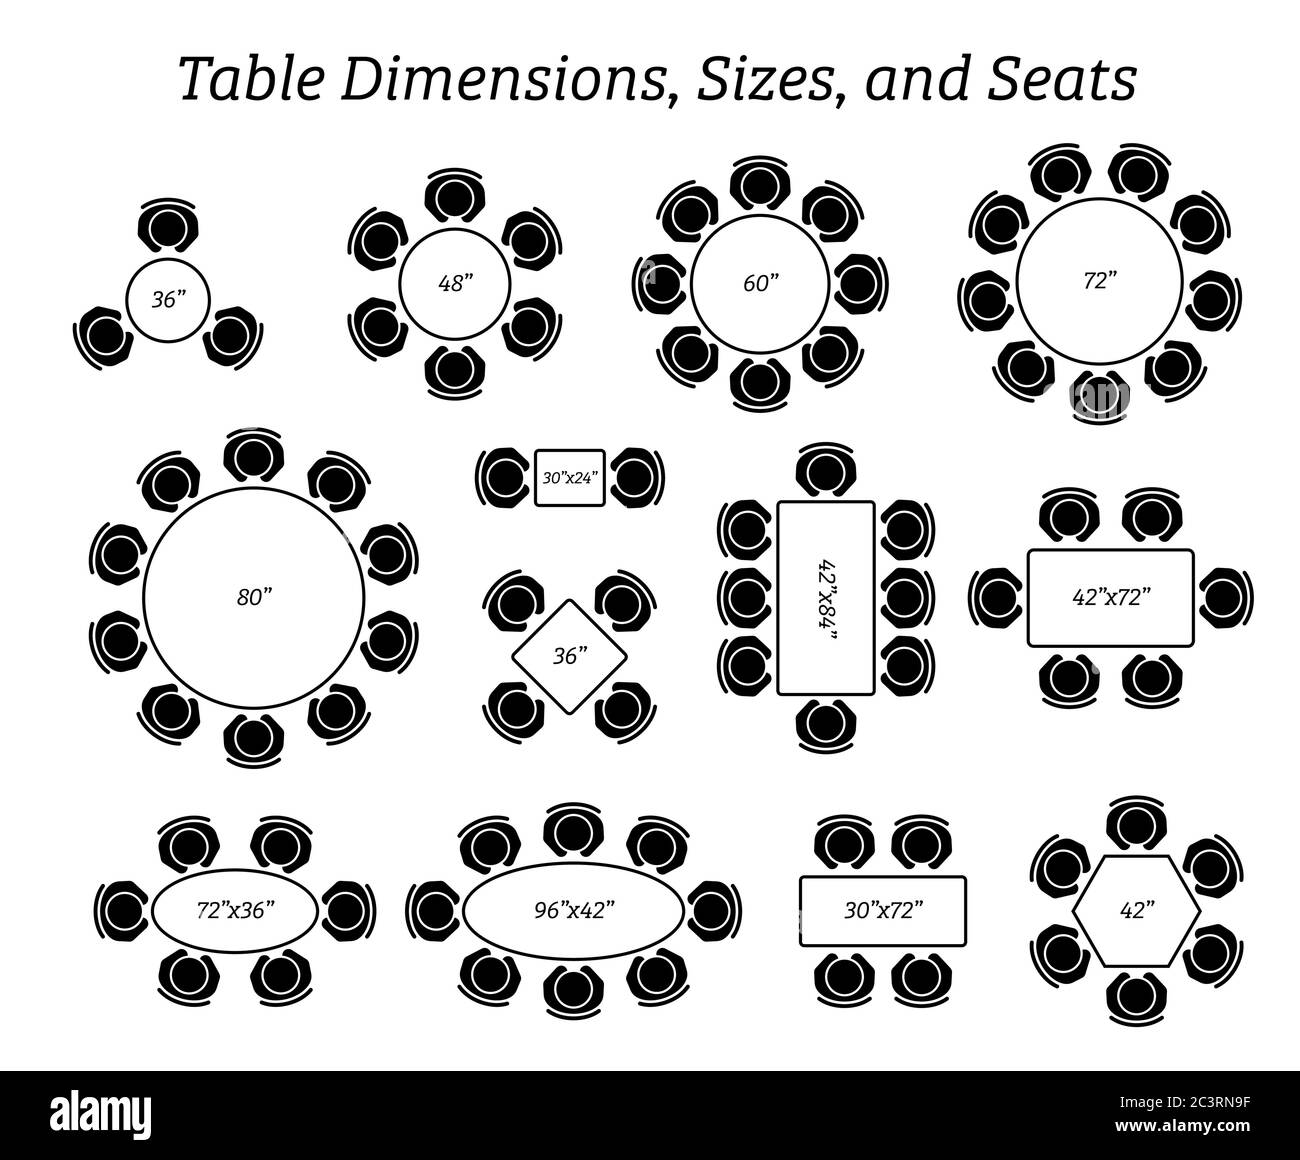 Round, oval, and rectangular table dimensions, sizes, and seating. Pictogram icons depict the top view and number of seating in different type of tabl Stock Vector